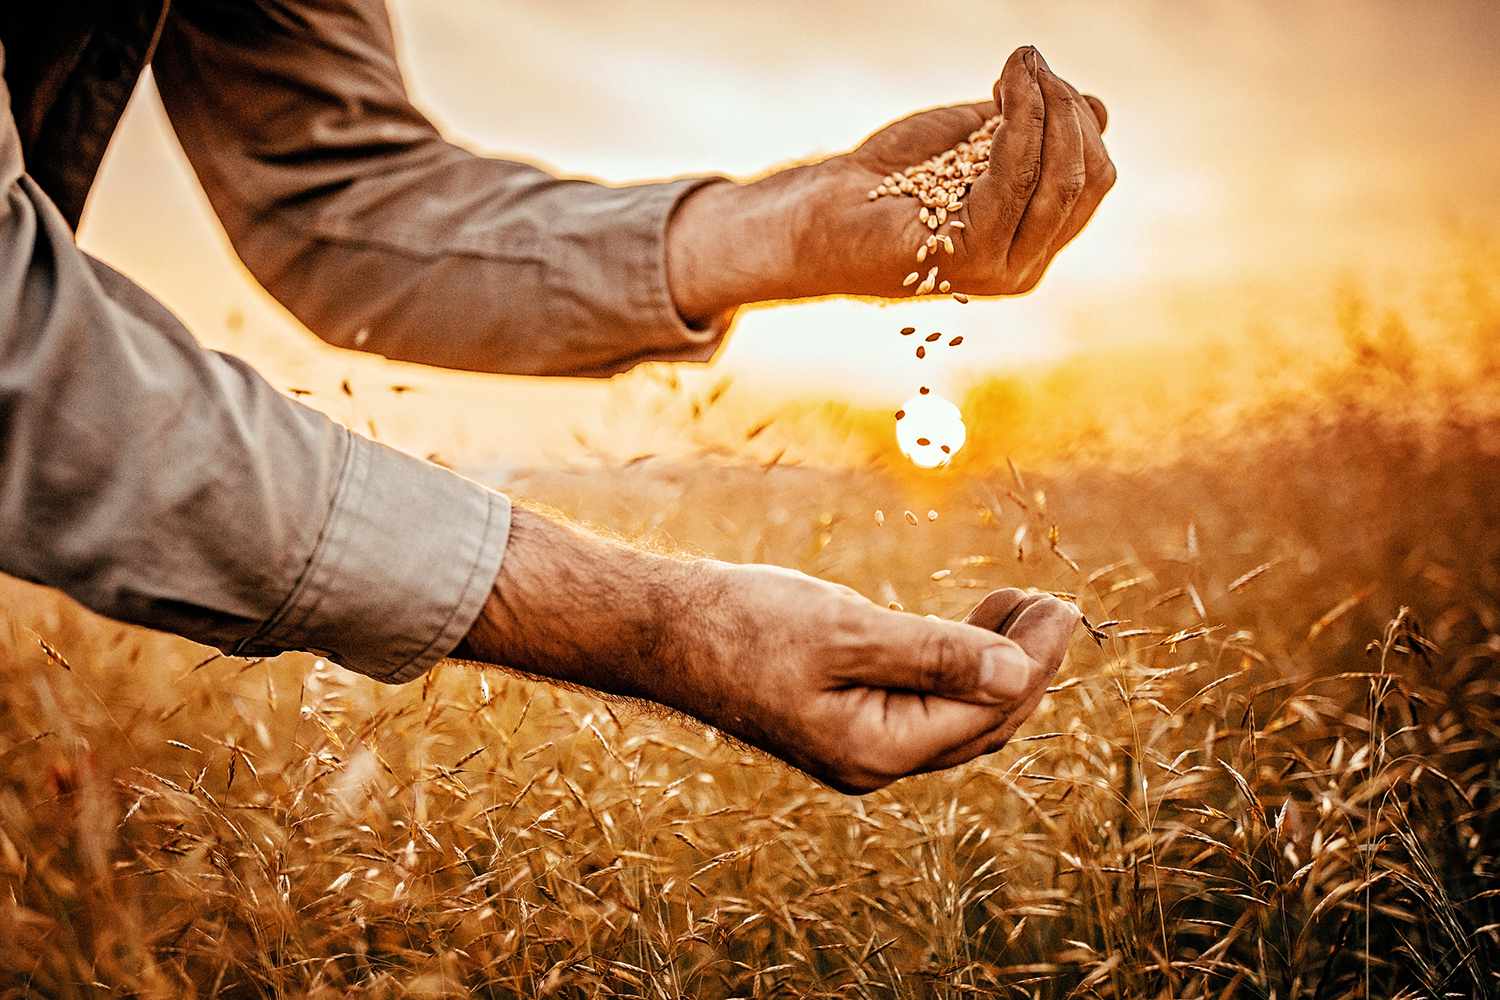 Farmer sifting grain from one hand to the other in field as the sun sets